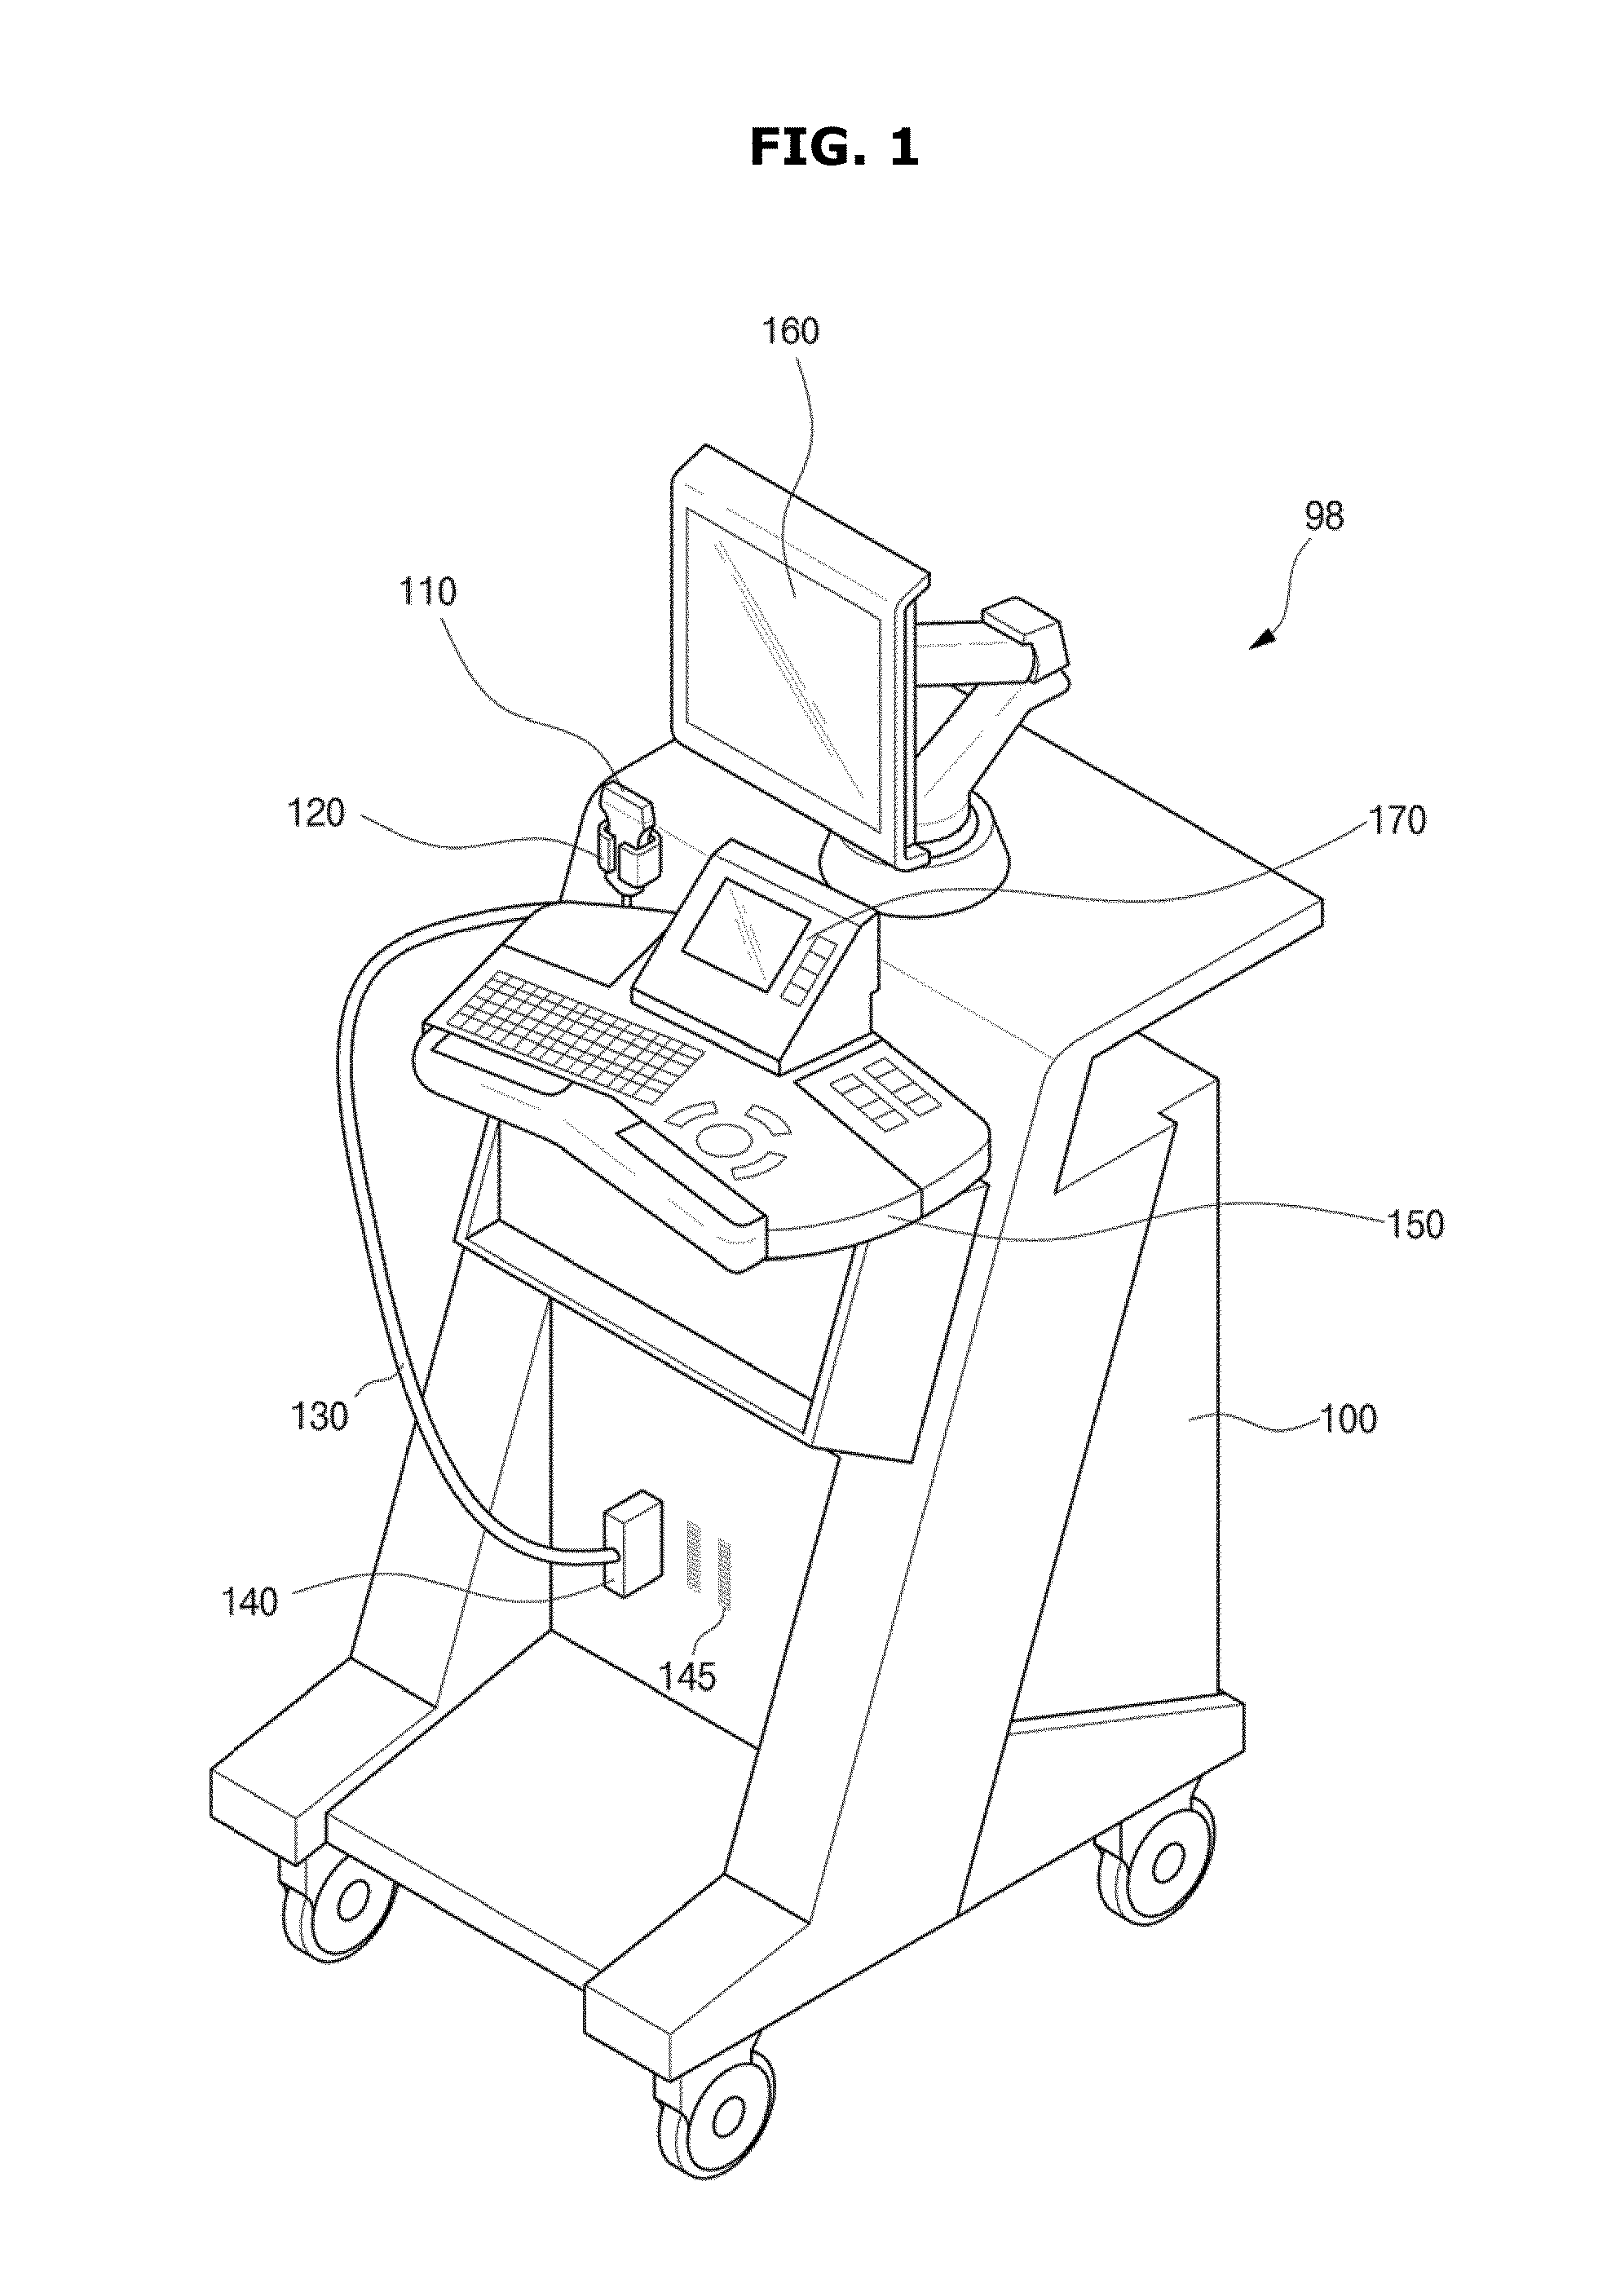 Apparatus for processing ultrasonic image and method thereof